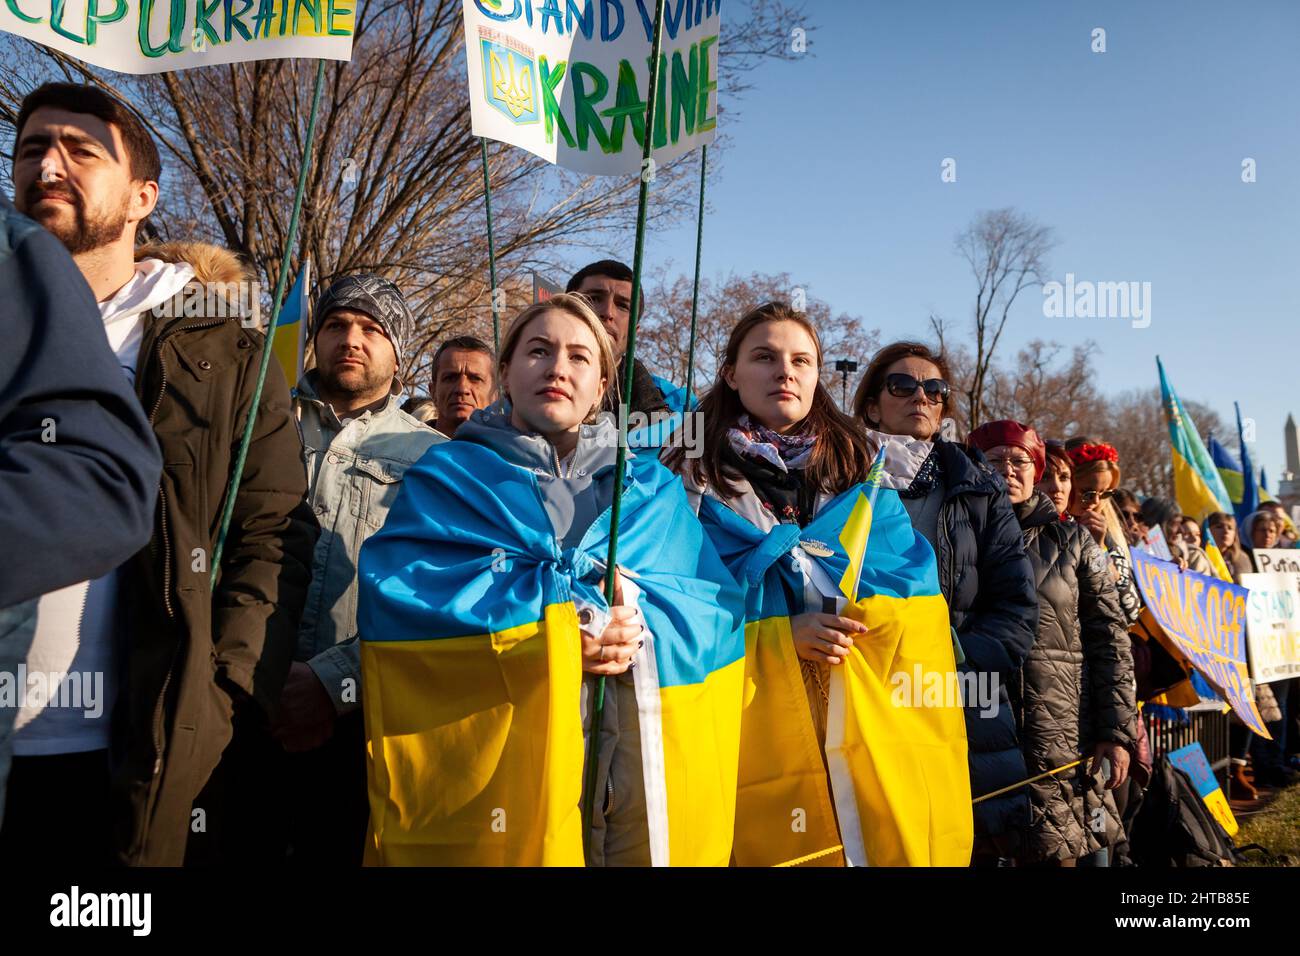 Washington, DC, USA, 27 February, 2021.  Pictured: Protesters wearing Ukrainian flags attend a rally at the White House.  Thousands of people from across the United States gathered to thank the US and other countries for their help, and to demand a no-fly zone and other assistance for Ukraine.  The event was sponsored by United Help Ukraine and US Ukrainian Activists, both U.S.-based assistance and advocacy organizations.  Credit: Allison Bailey / Alamy Live News Stock Photo